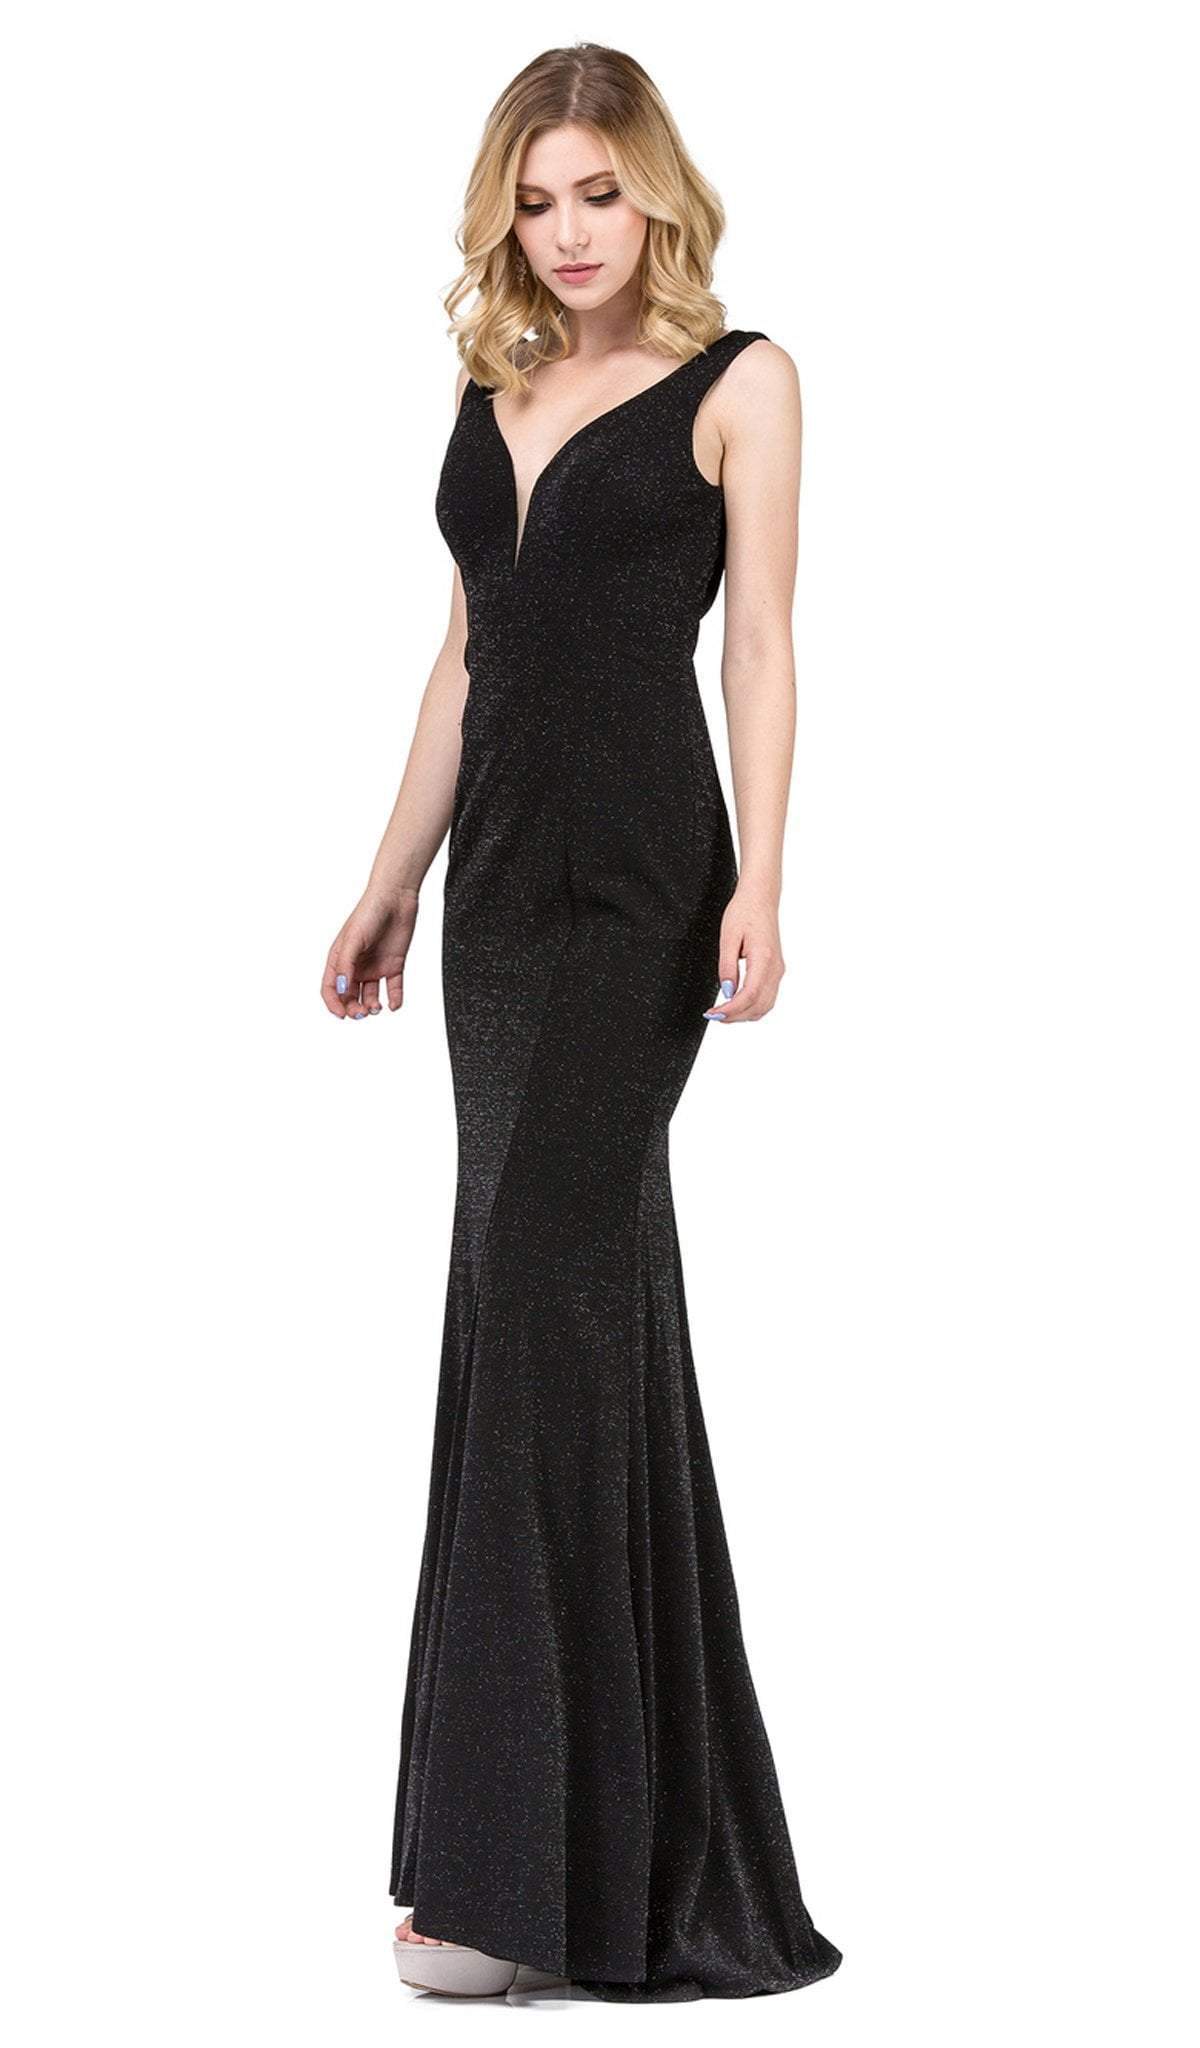 Dancing Queen - 2497 Shimmer Fabric Plunging Neck Fitted Prom Dress